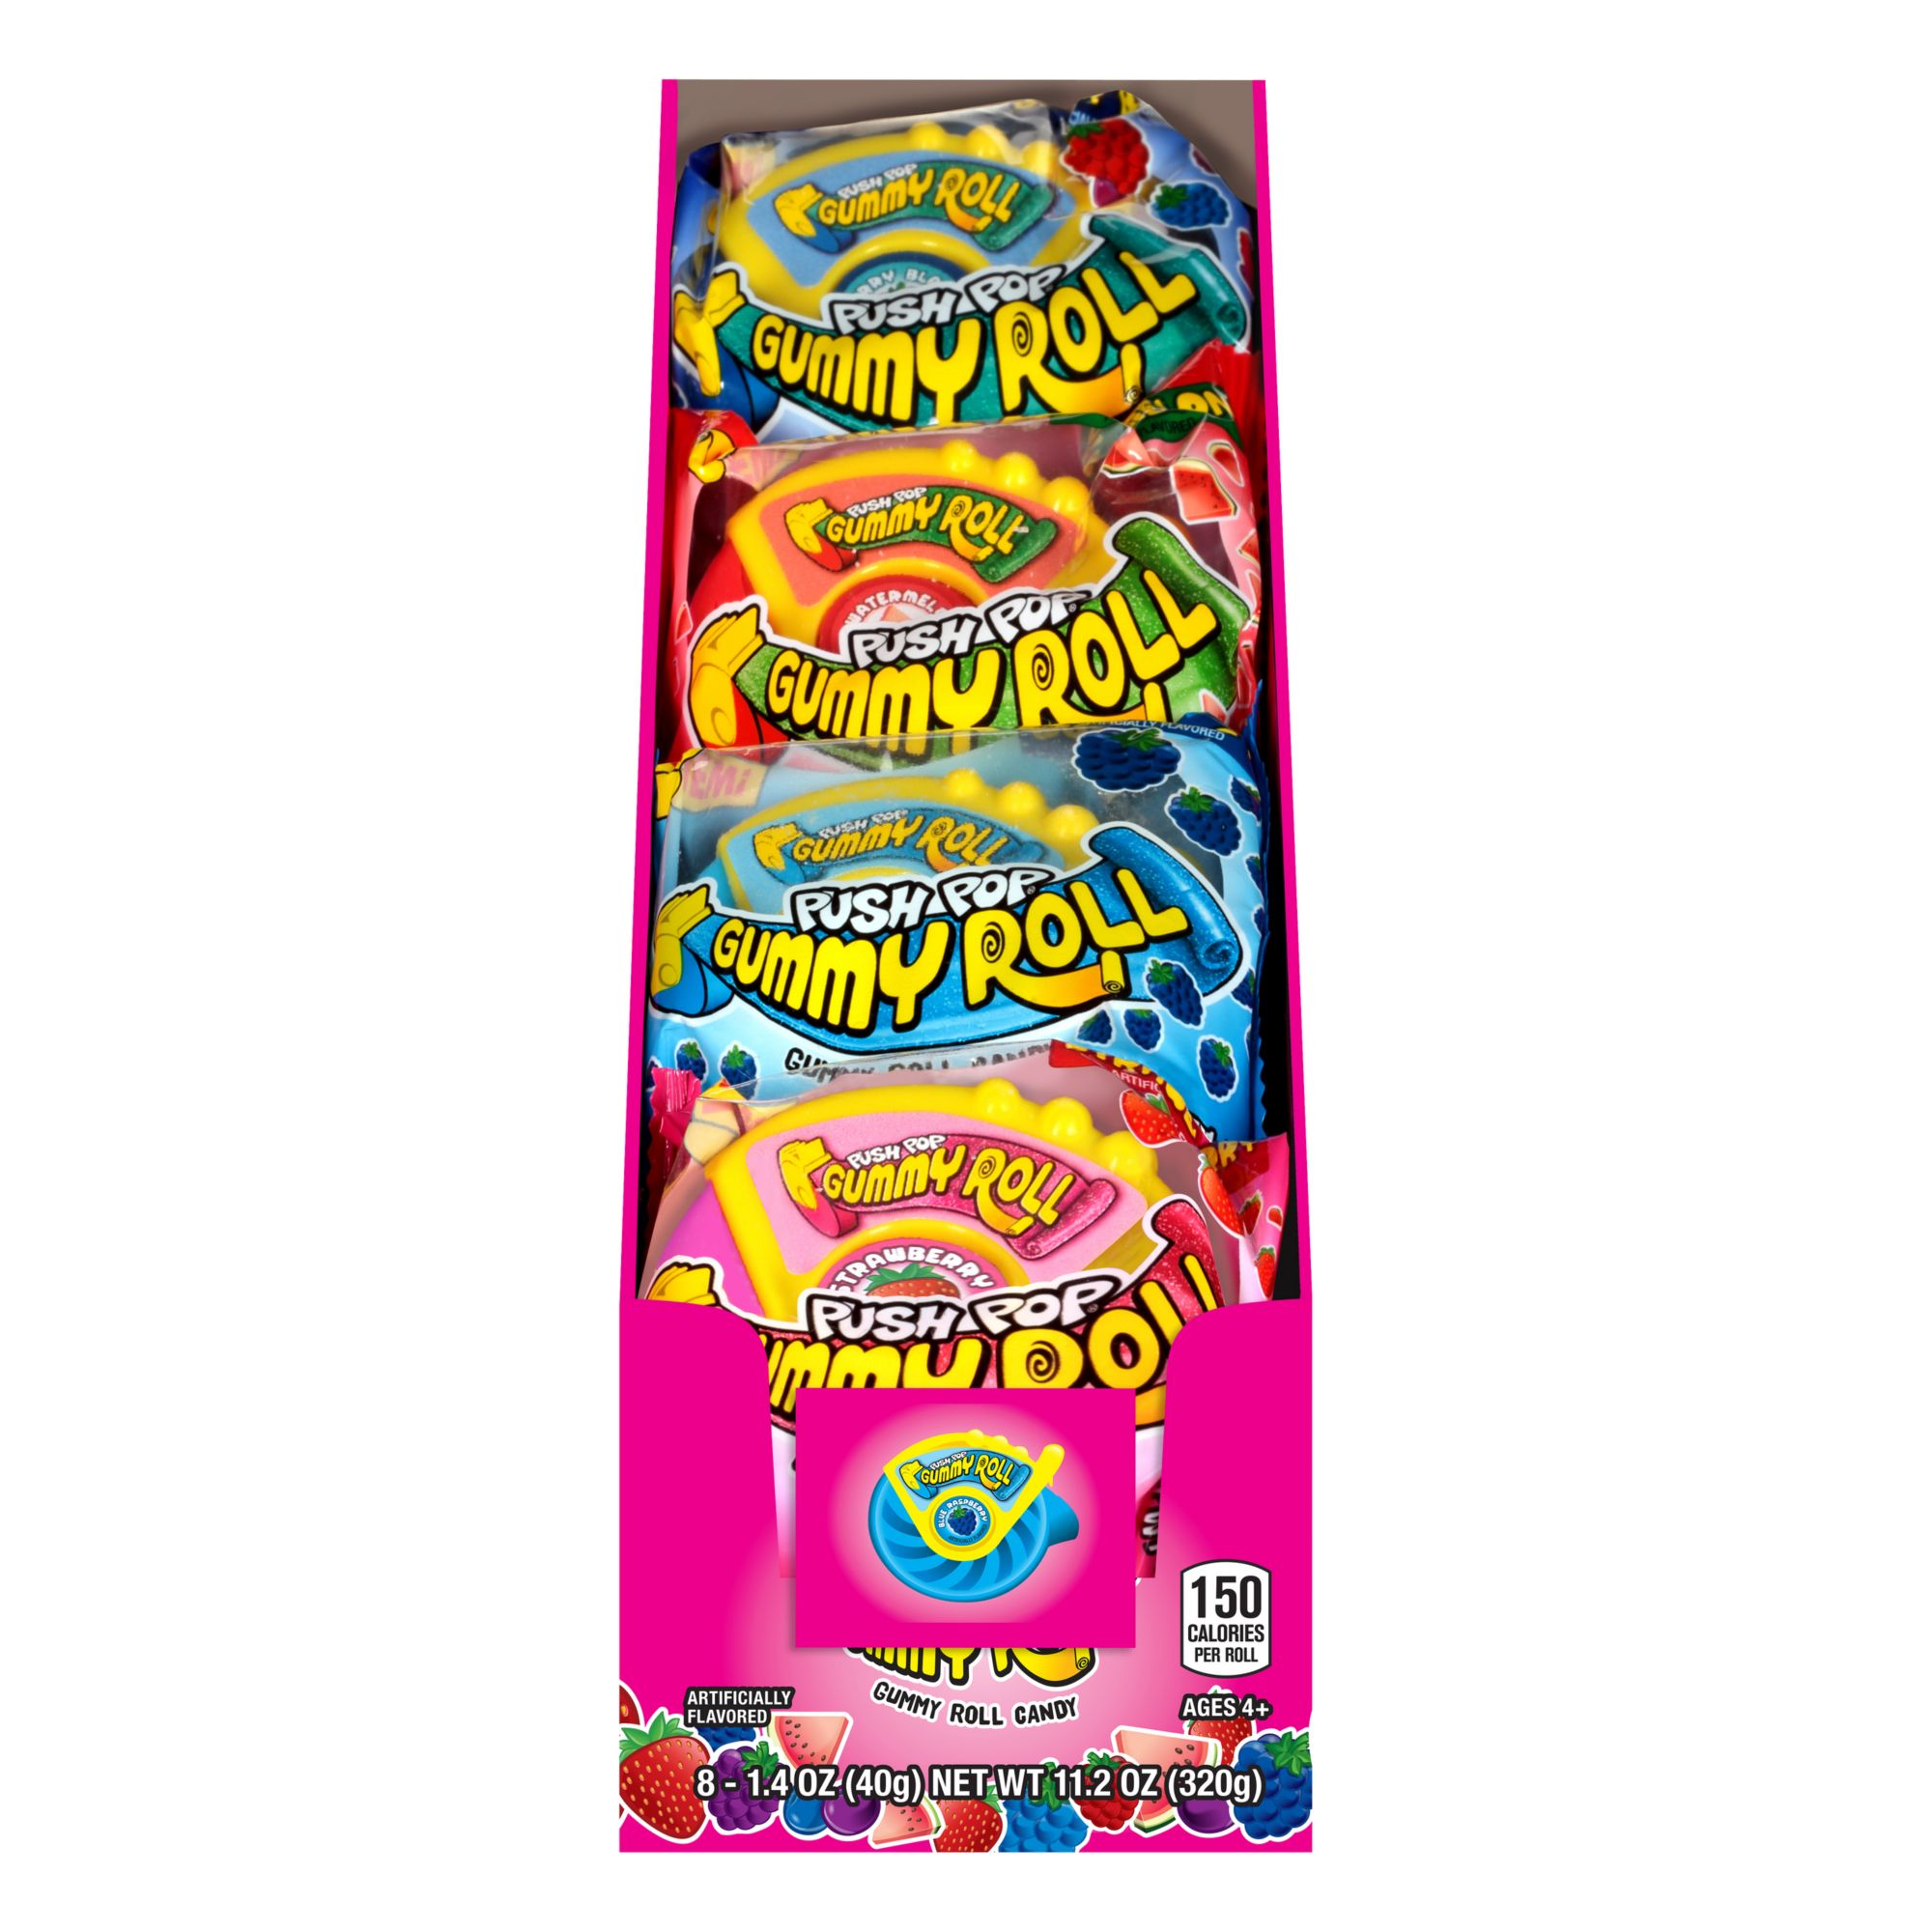 Push Pop Gummy Roll 8 Count Variety Pack - Individual Gummy Easter Candy  with Assorted Fruity Flavors - Fun Lightly Sour Gummy Candy Easter Basket